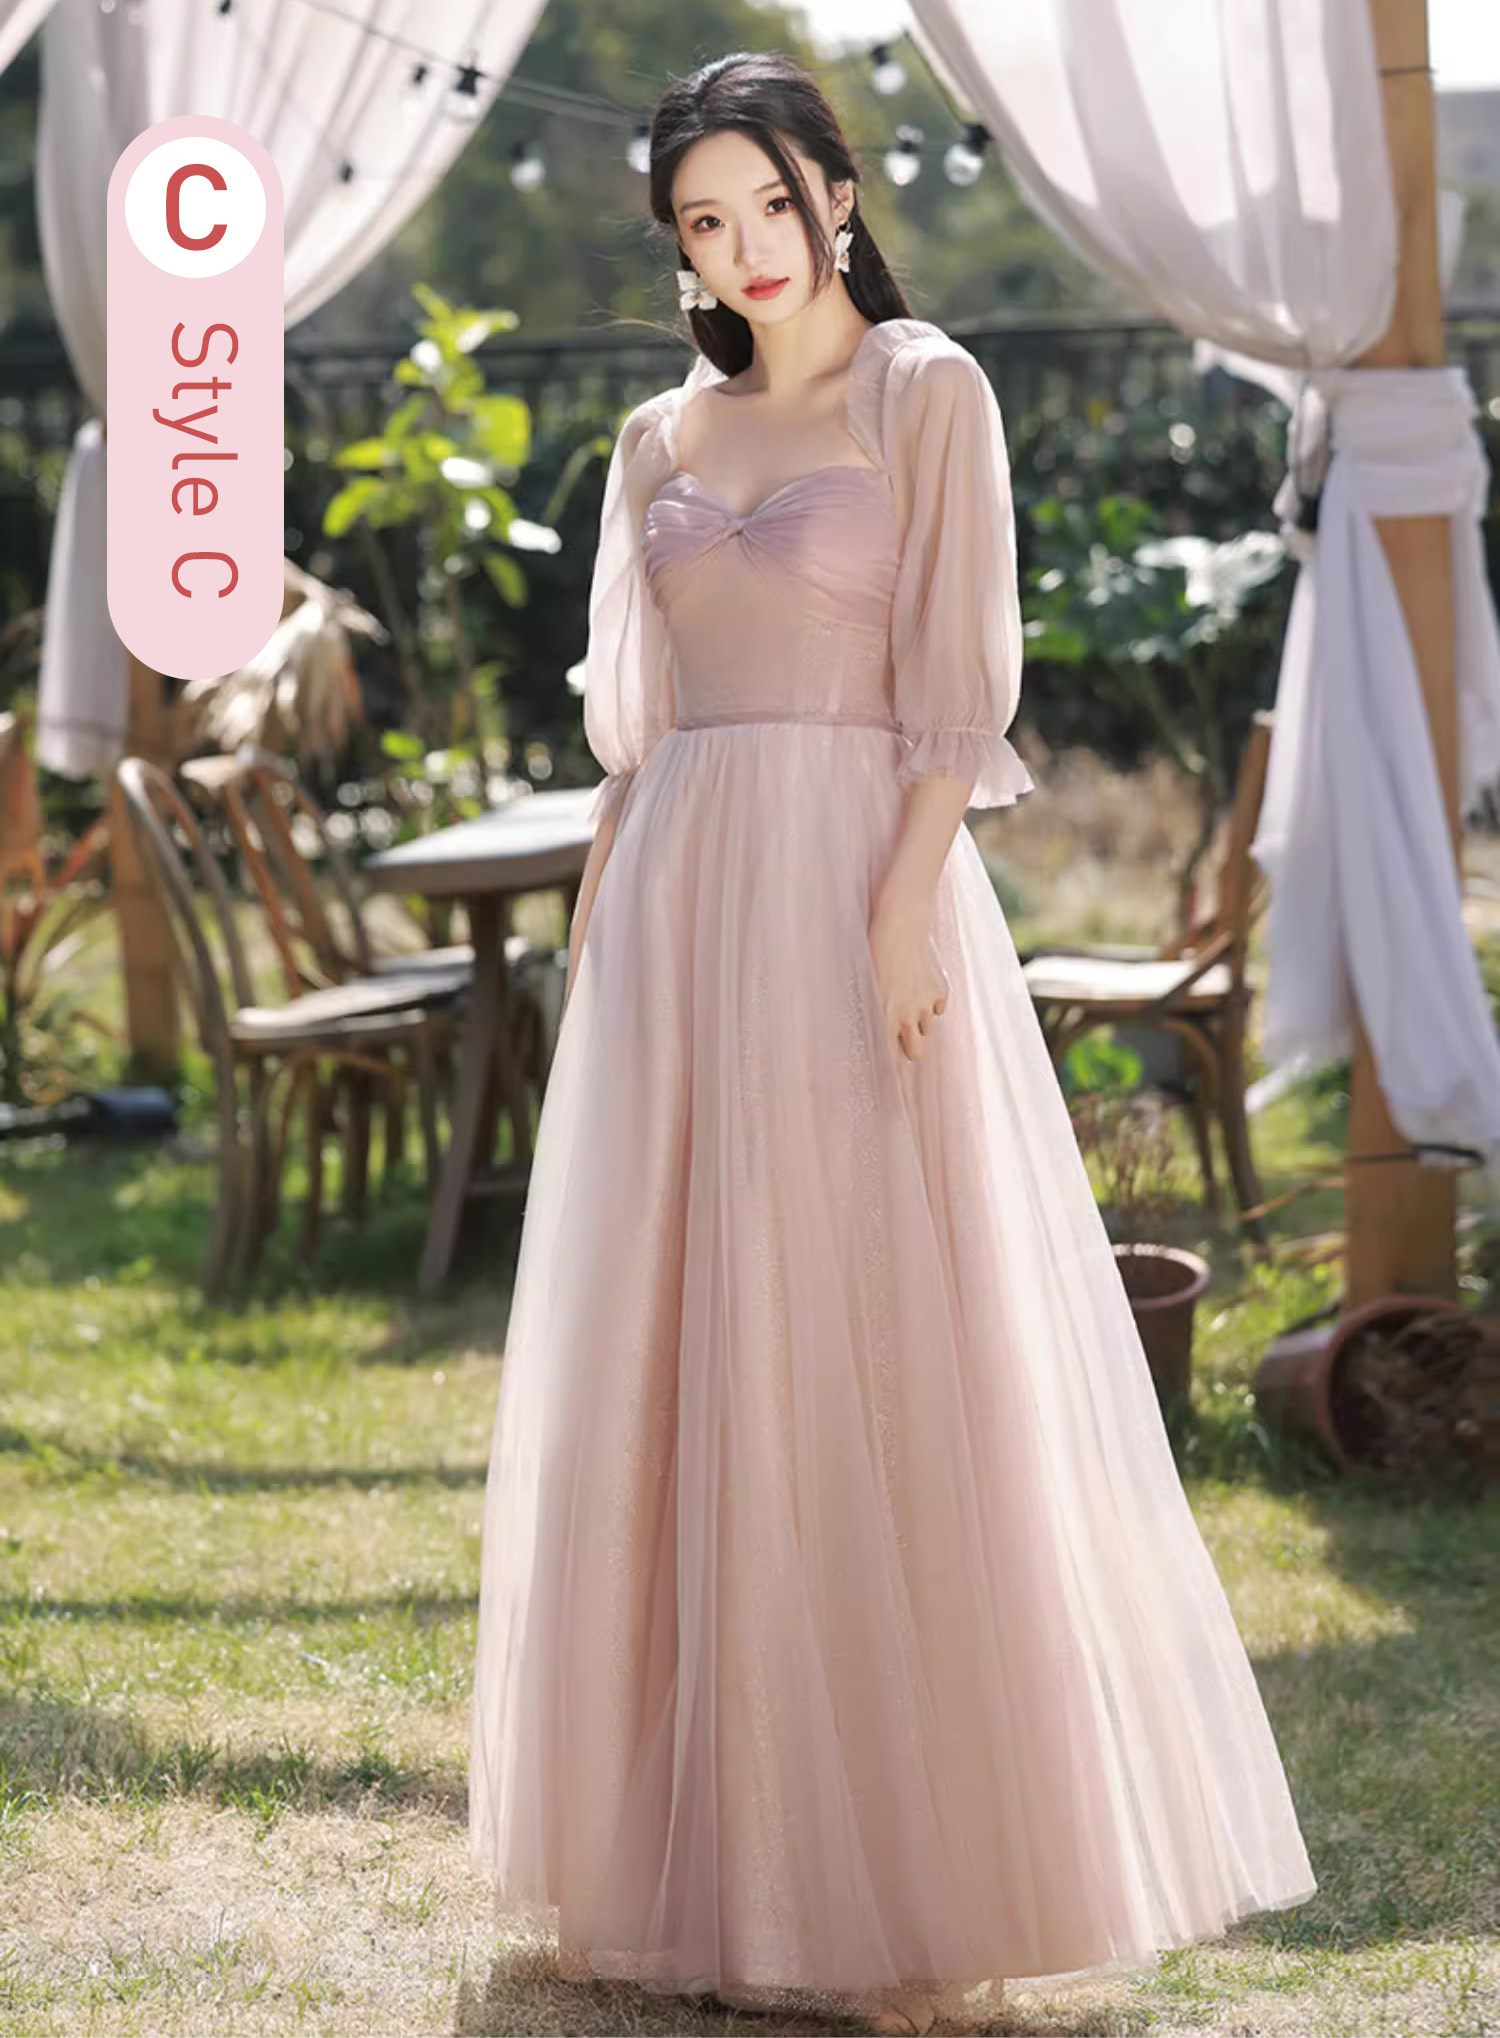 Elegant-Pink-Tulle-Slim-Fit-Bridesmaid-Wedding-Guest-Party-Maxi-Dress23